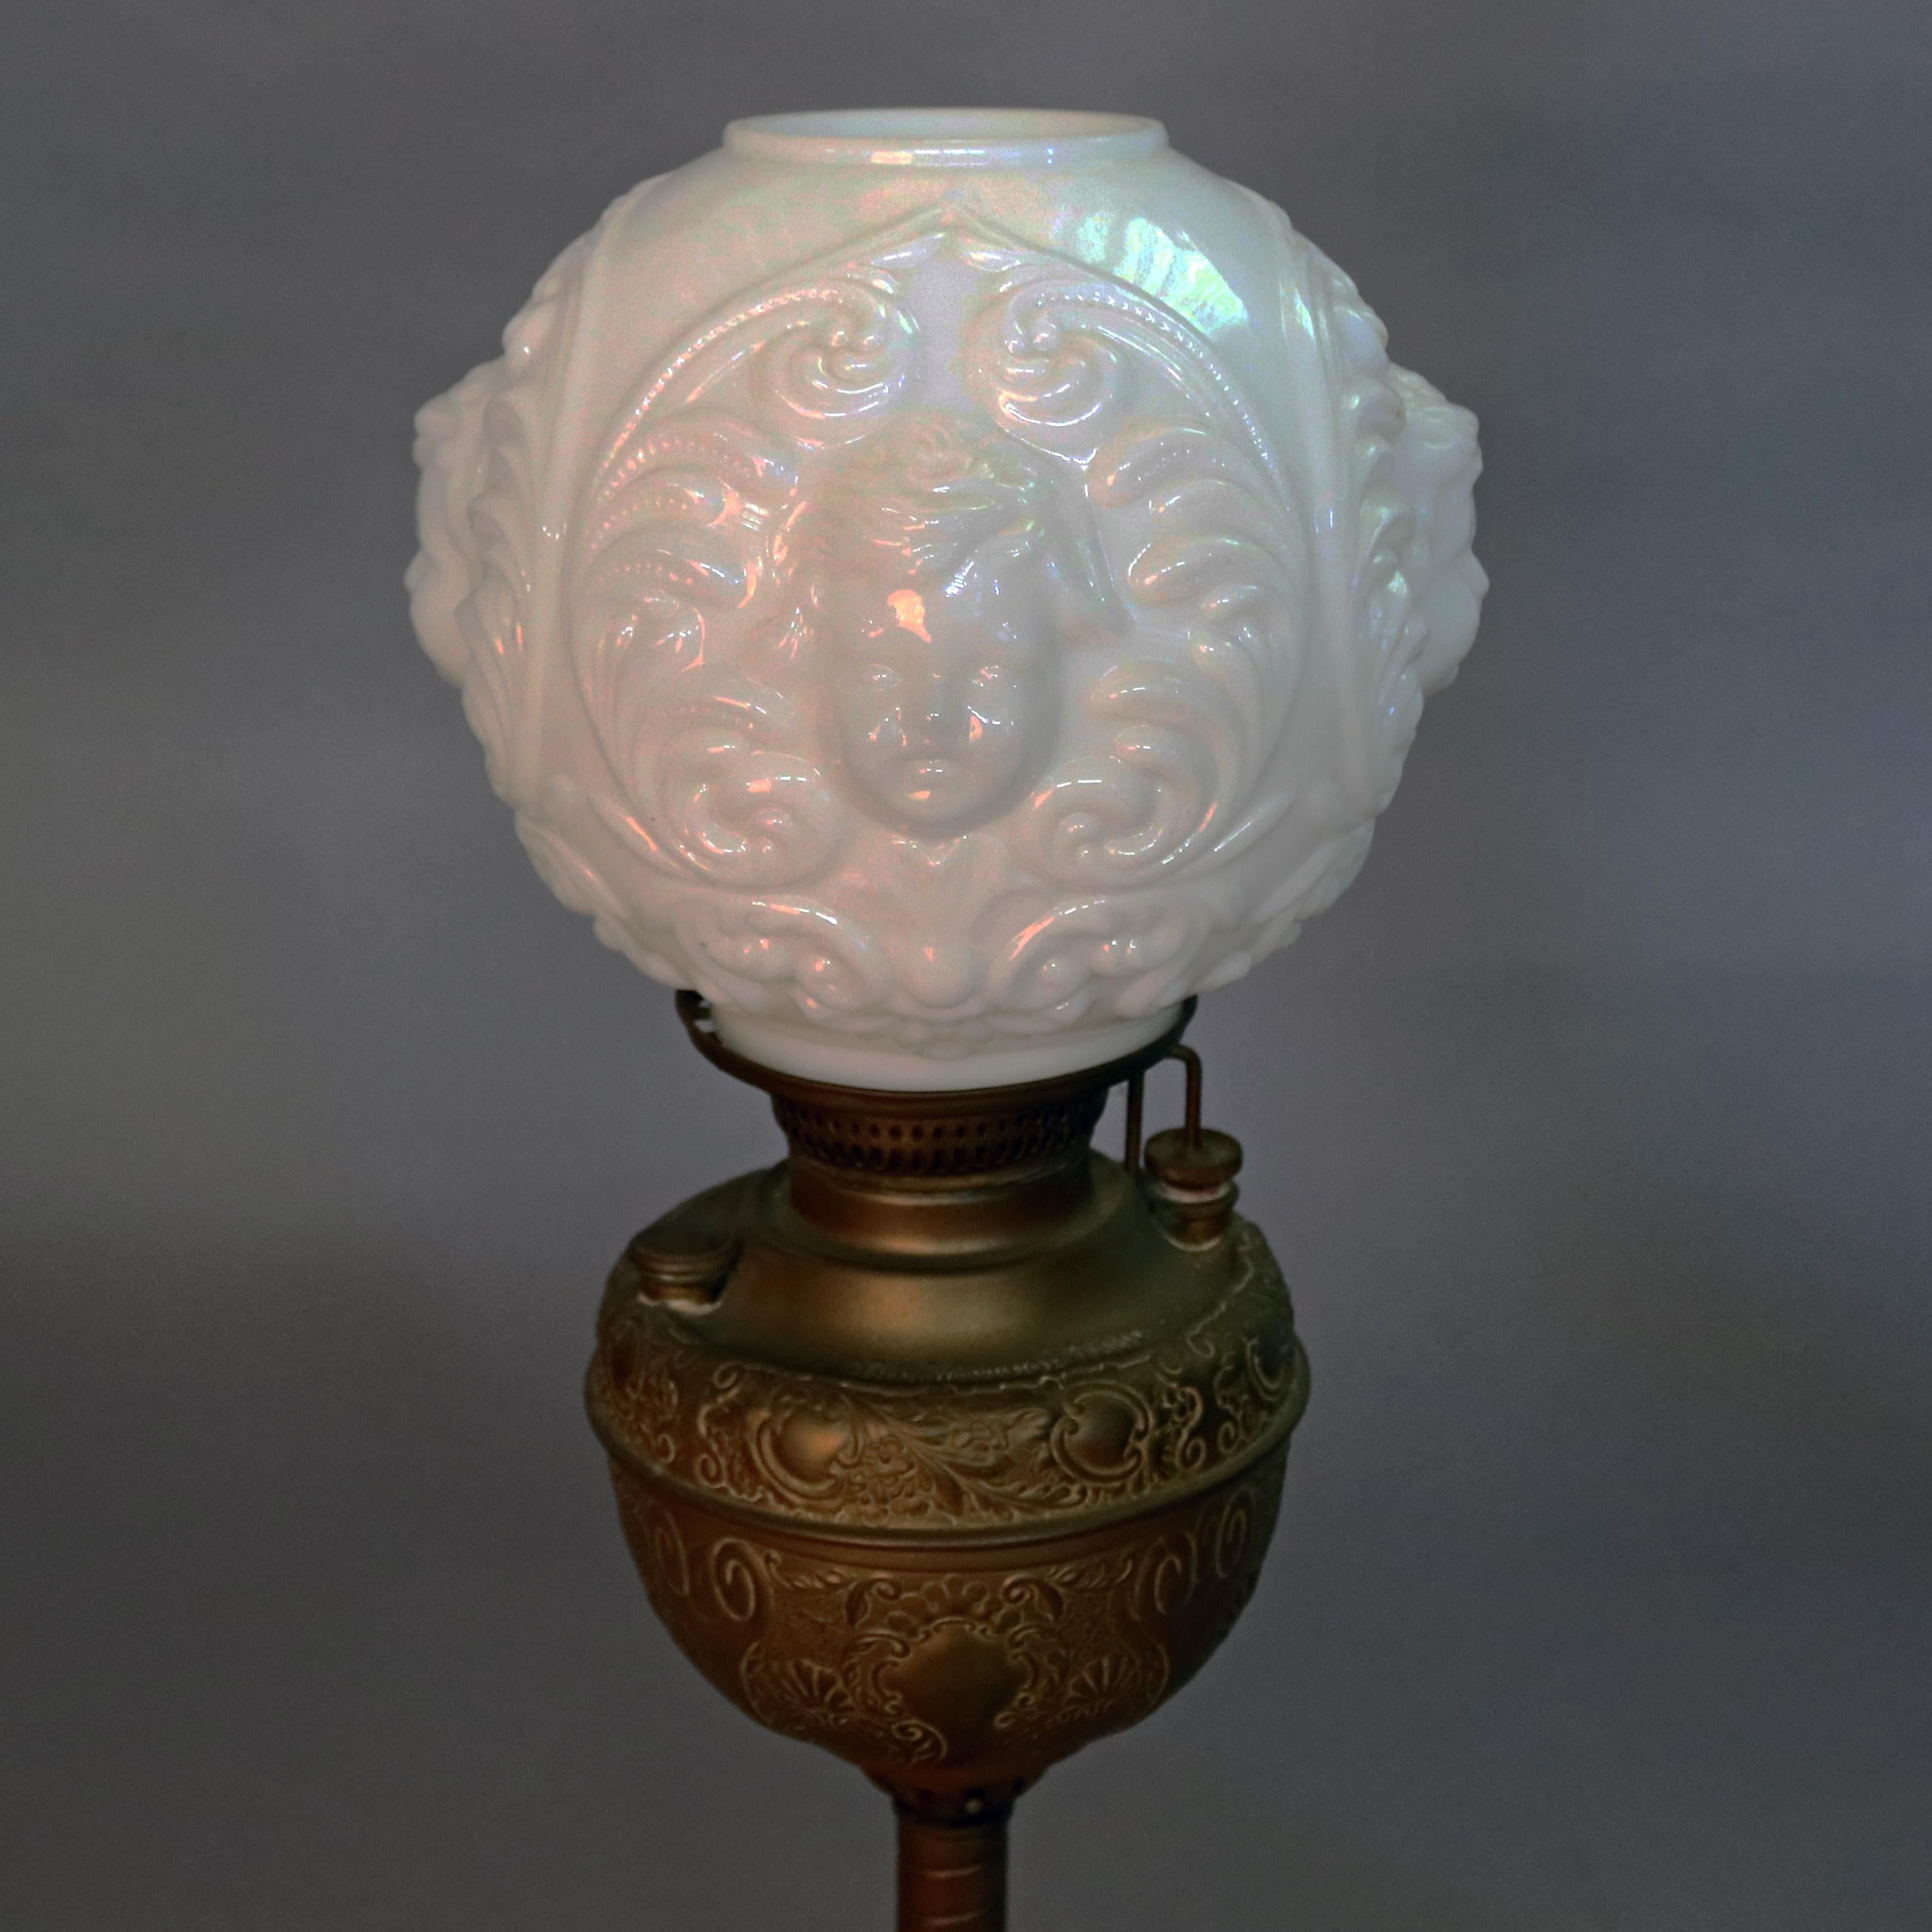 American Antique Gone with the Wind Oil Lamp, Blown Out Milk Glass Cherub Shade